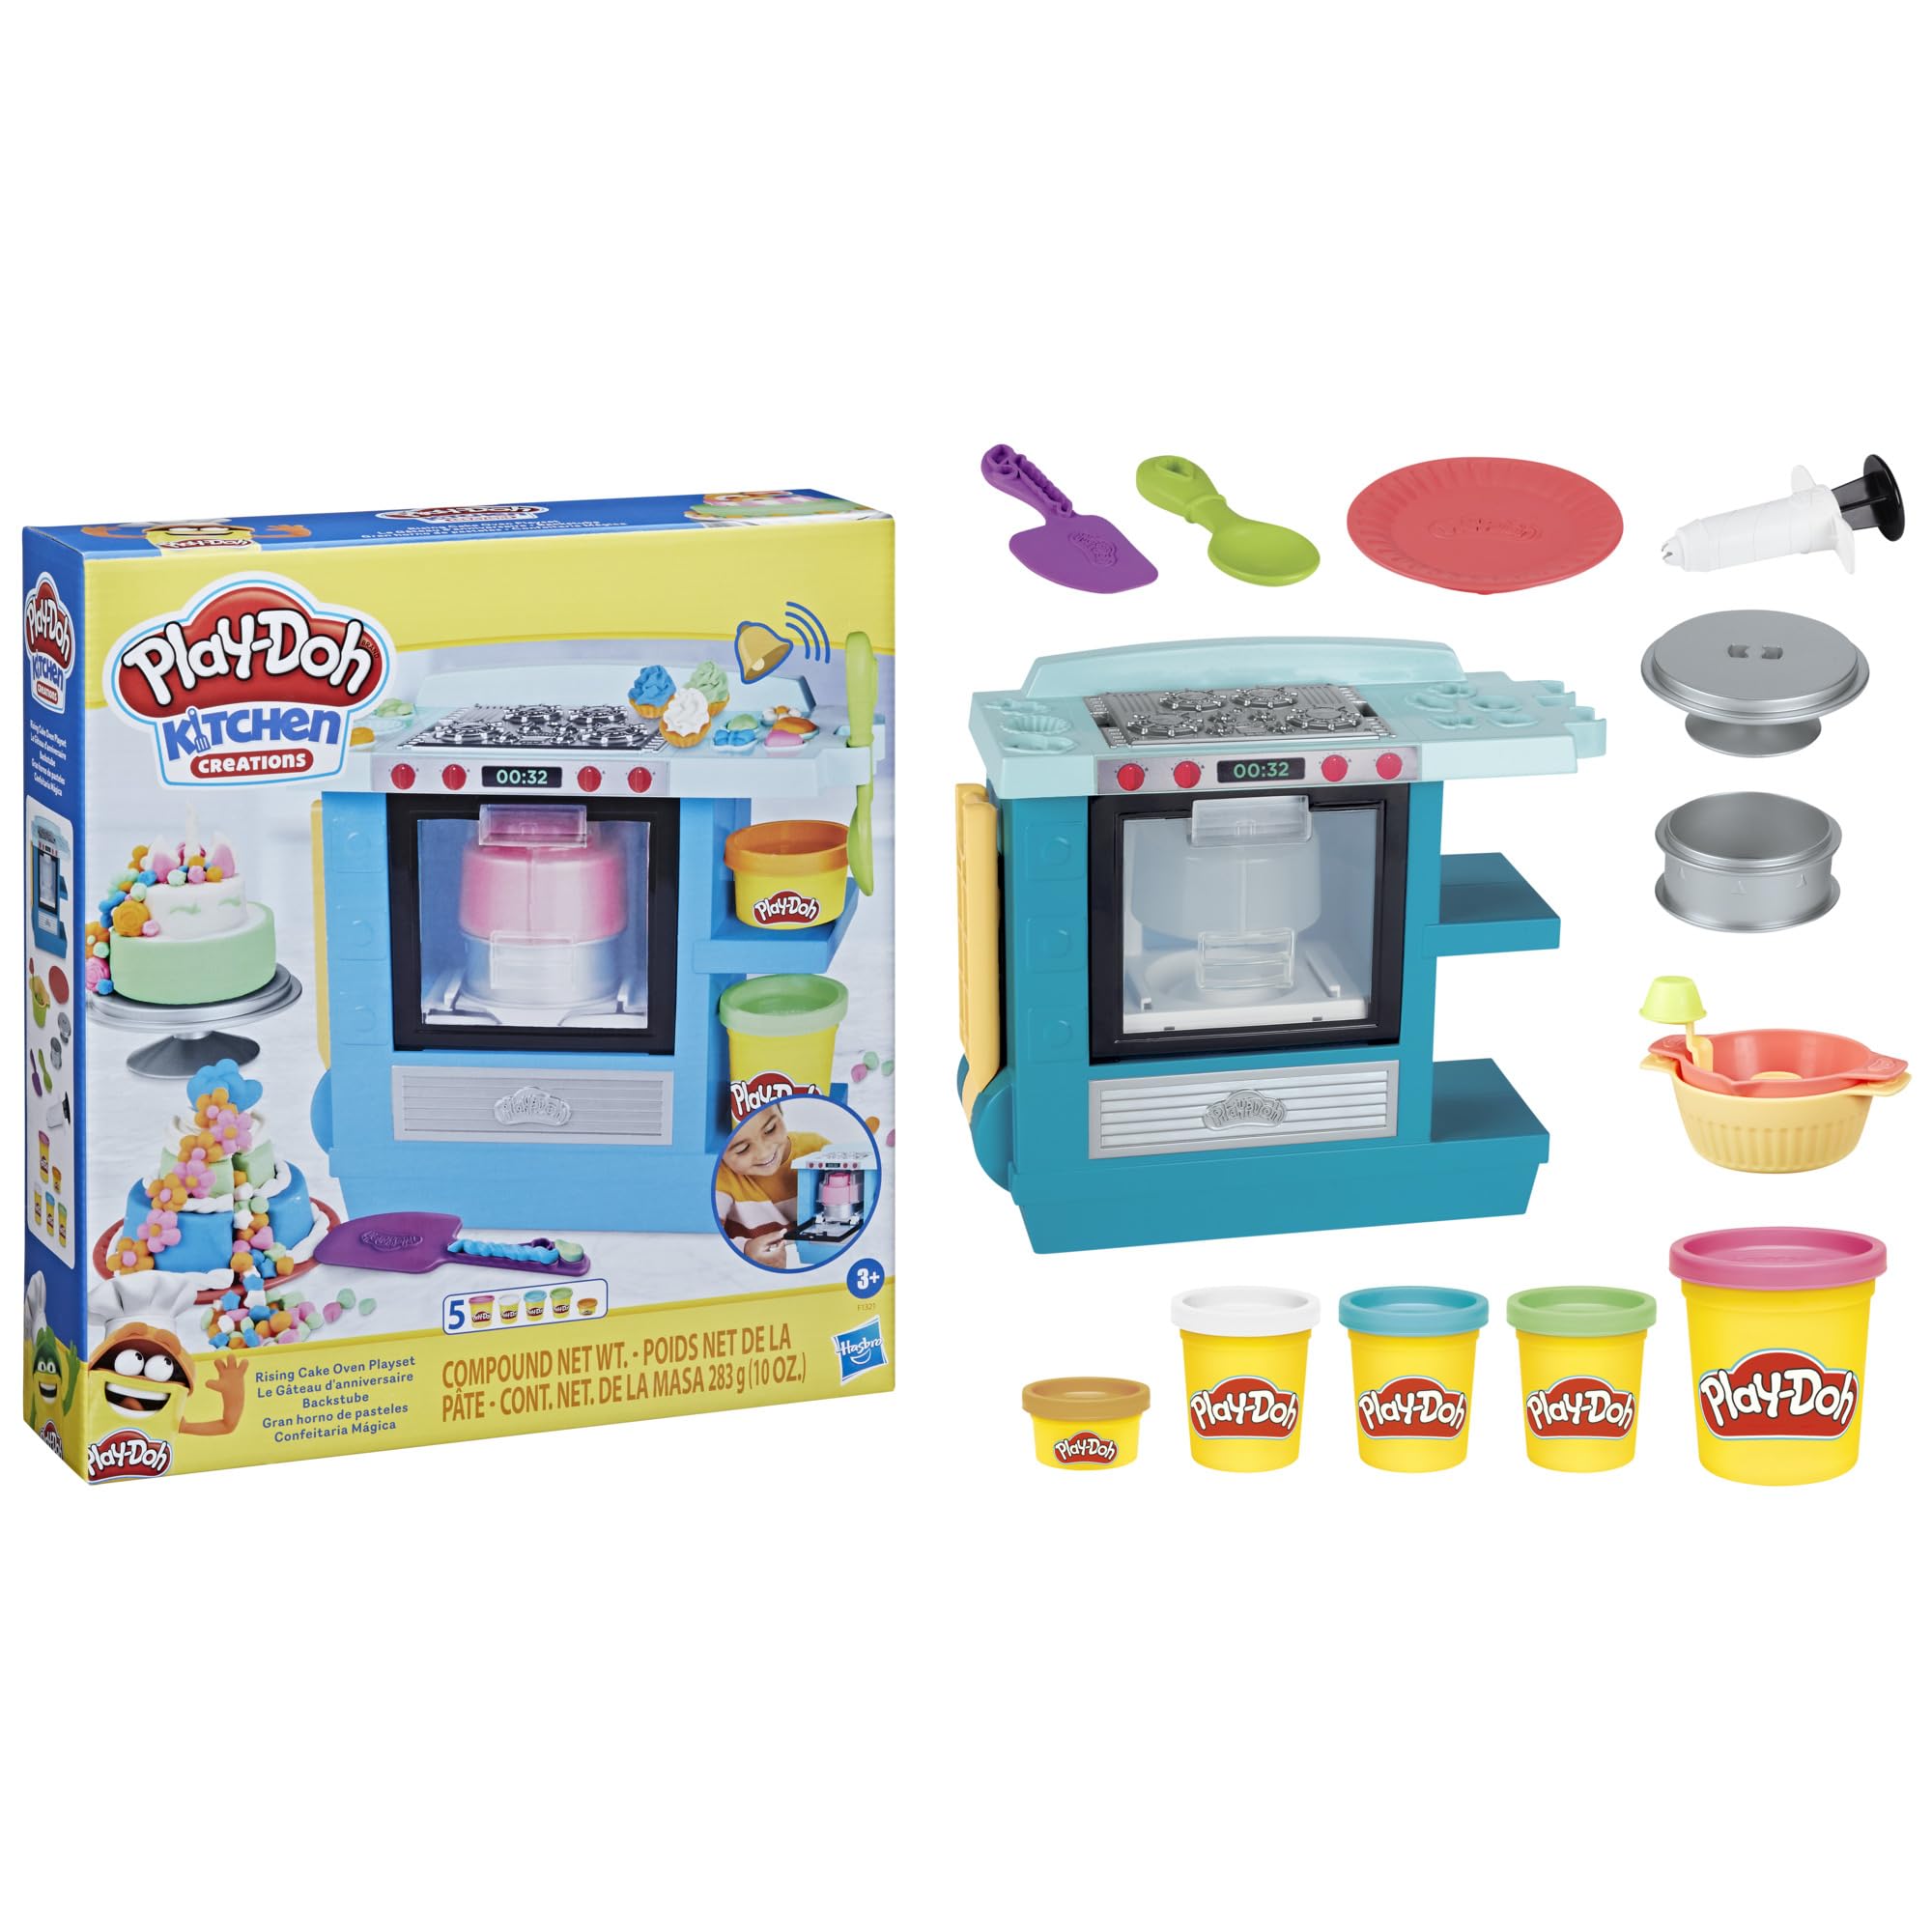 Play-Doh Kitchen Creations Rising Cake Oven Playset $9.25 + Free Shipping w/ Prime or on $35+